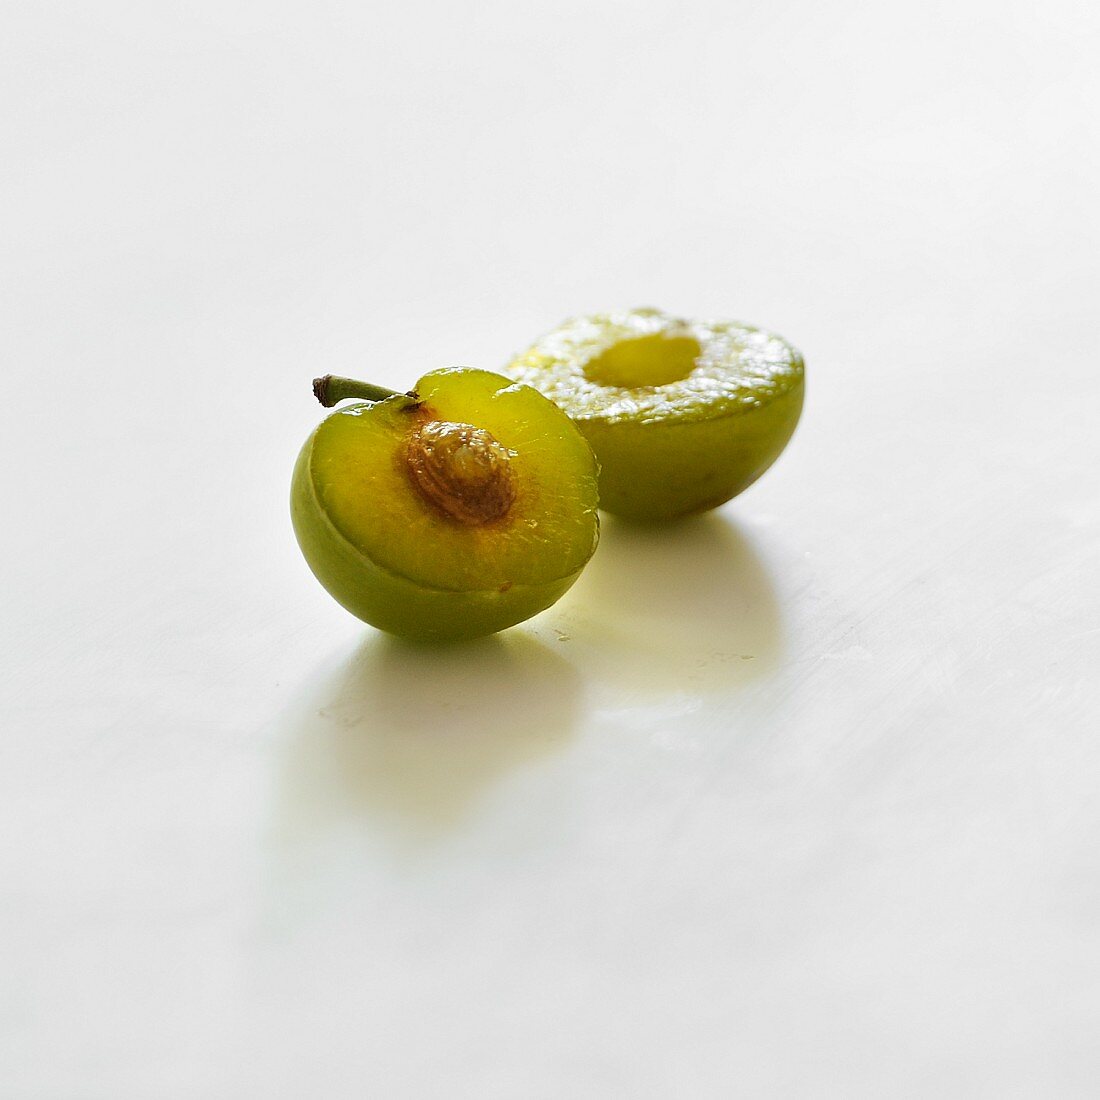 Greengage plum halves on a white background